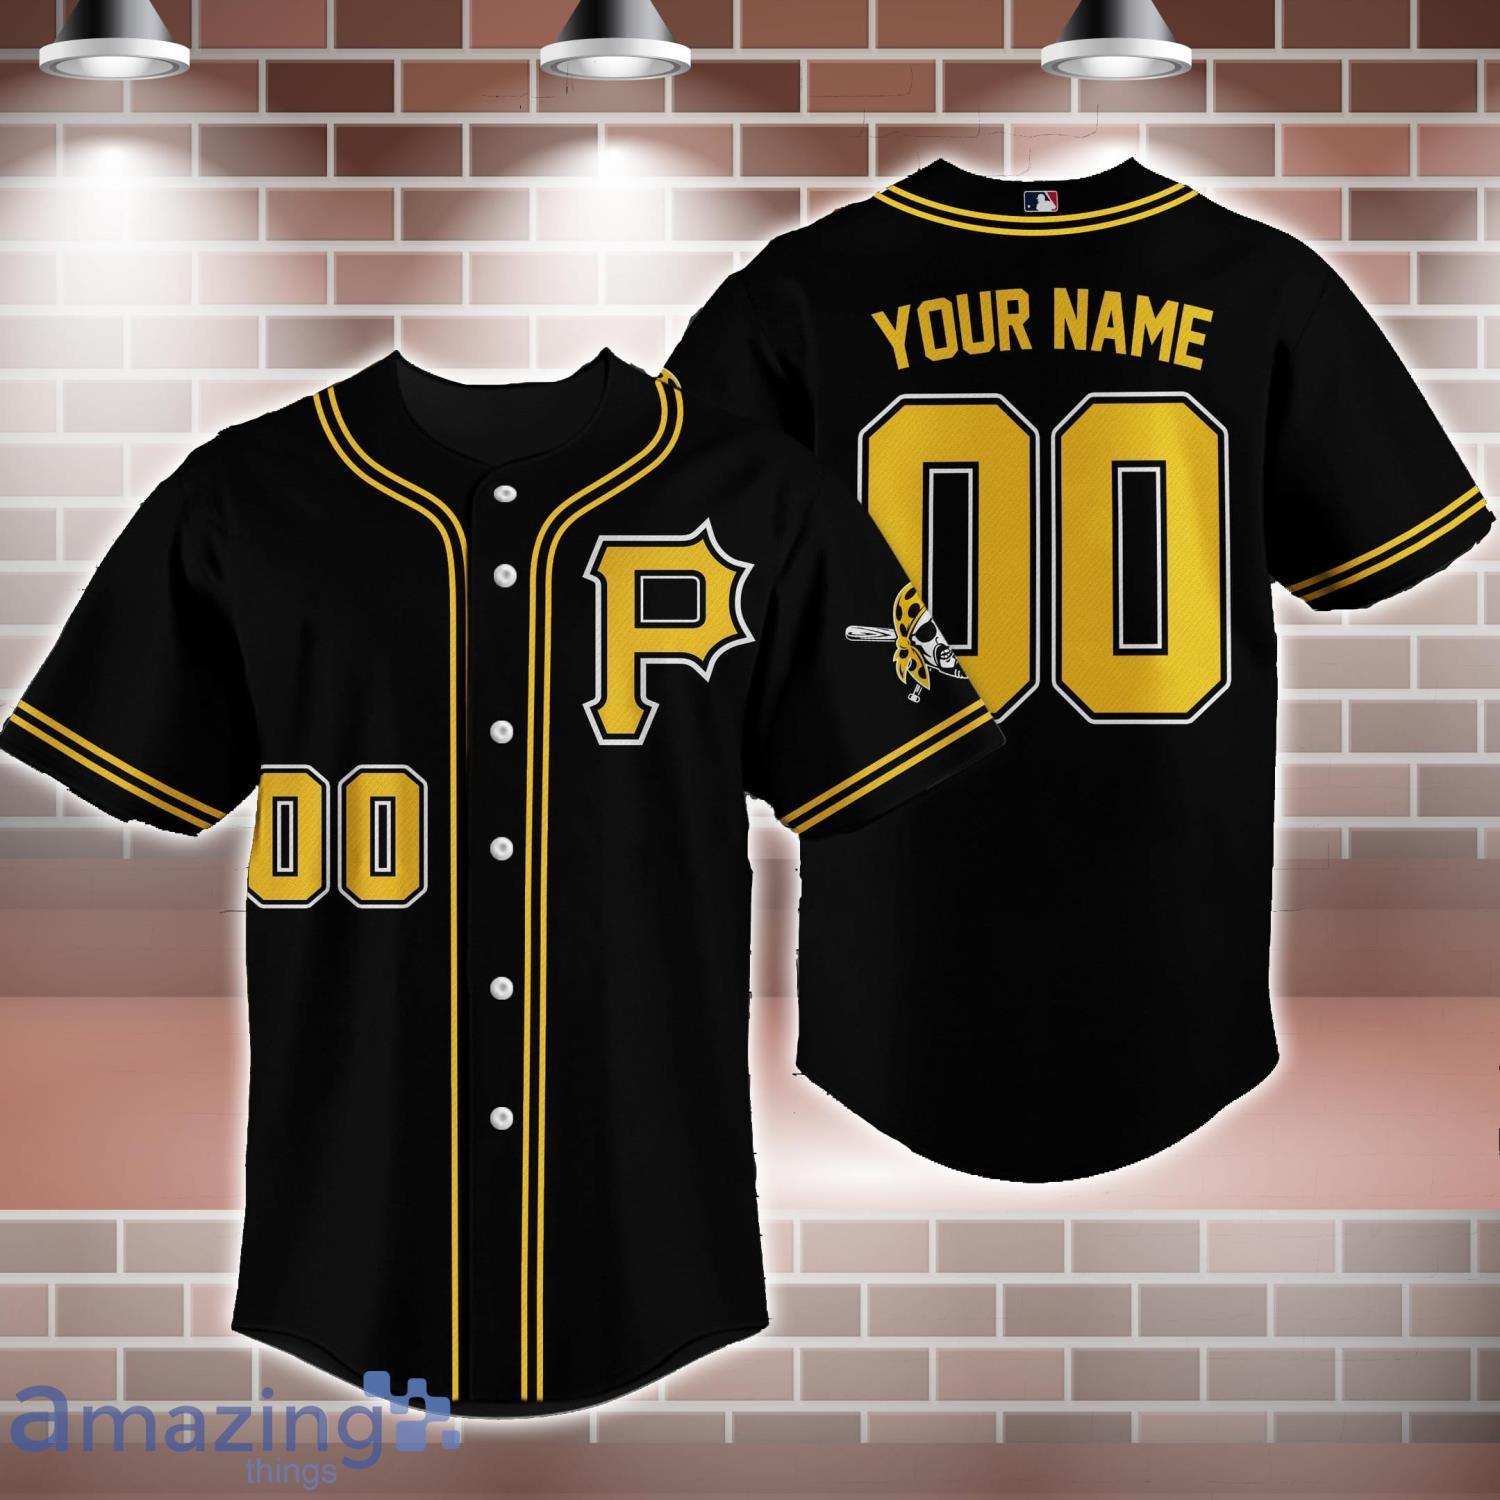 Pittsburgh Pirates MLB Baseball Jersey Shirt Custom Name And Number For Fans